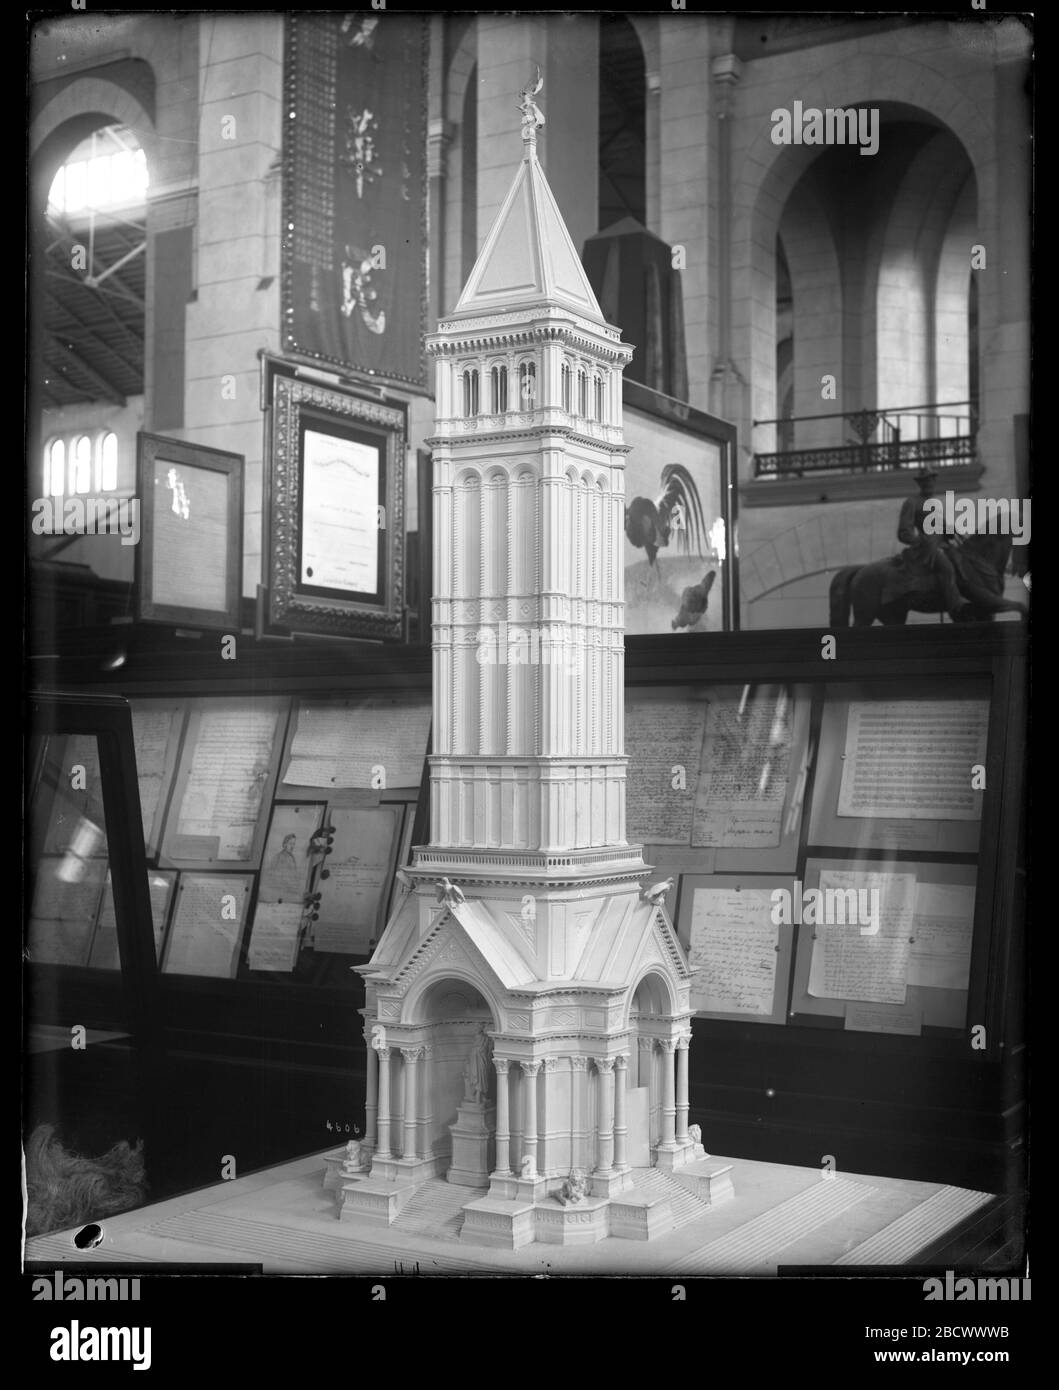 Model of Unidentified Monument. On display in the United States National Museum, now known as the Arts and Industries Building, near exhibits containing presidential relics.Smithsonian Institution Archives, Acc. 11-006, Box 014, Image No. MAH-4606 Stock Photo